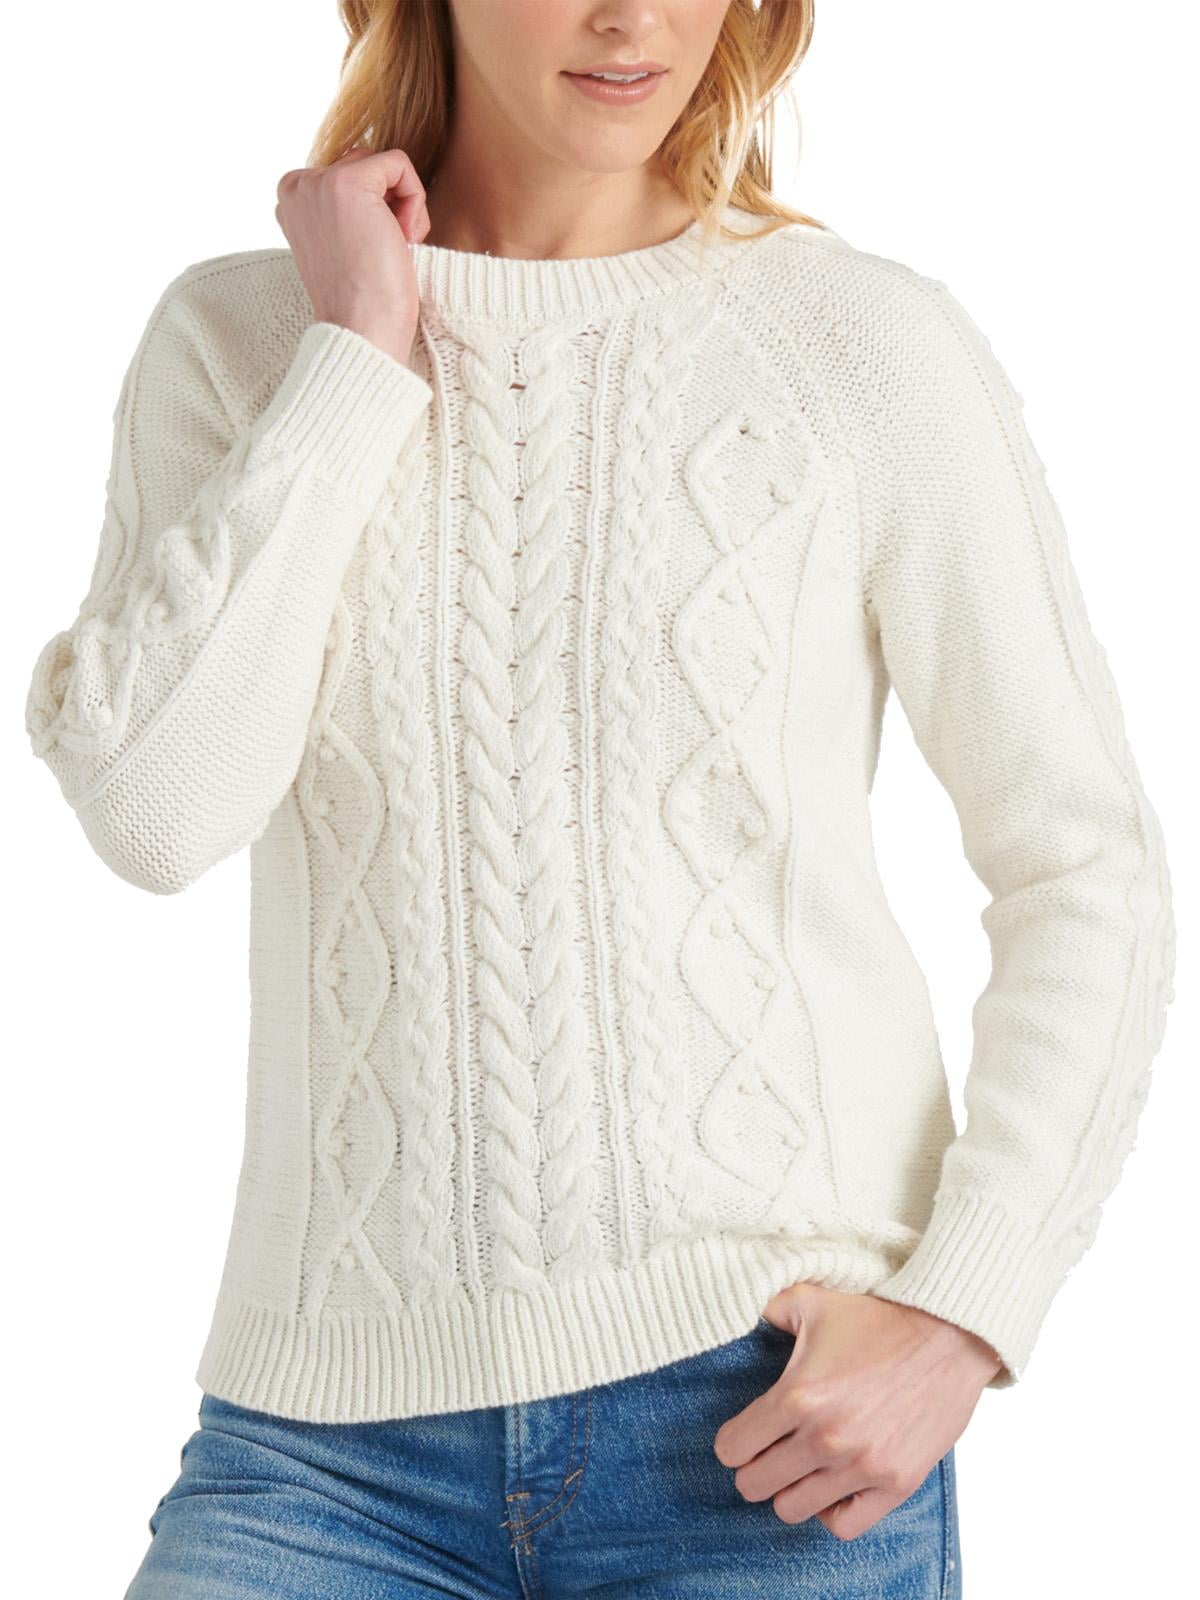 Lucky Brand Cable Stitch V-Neck Pullover